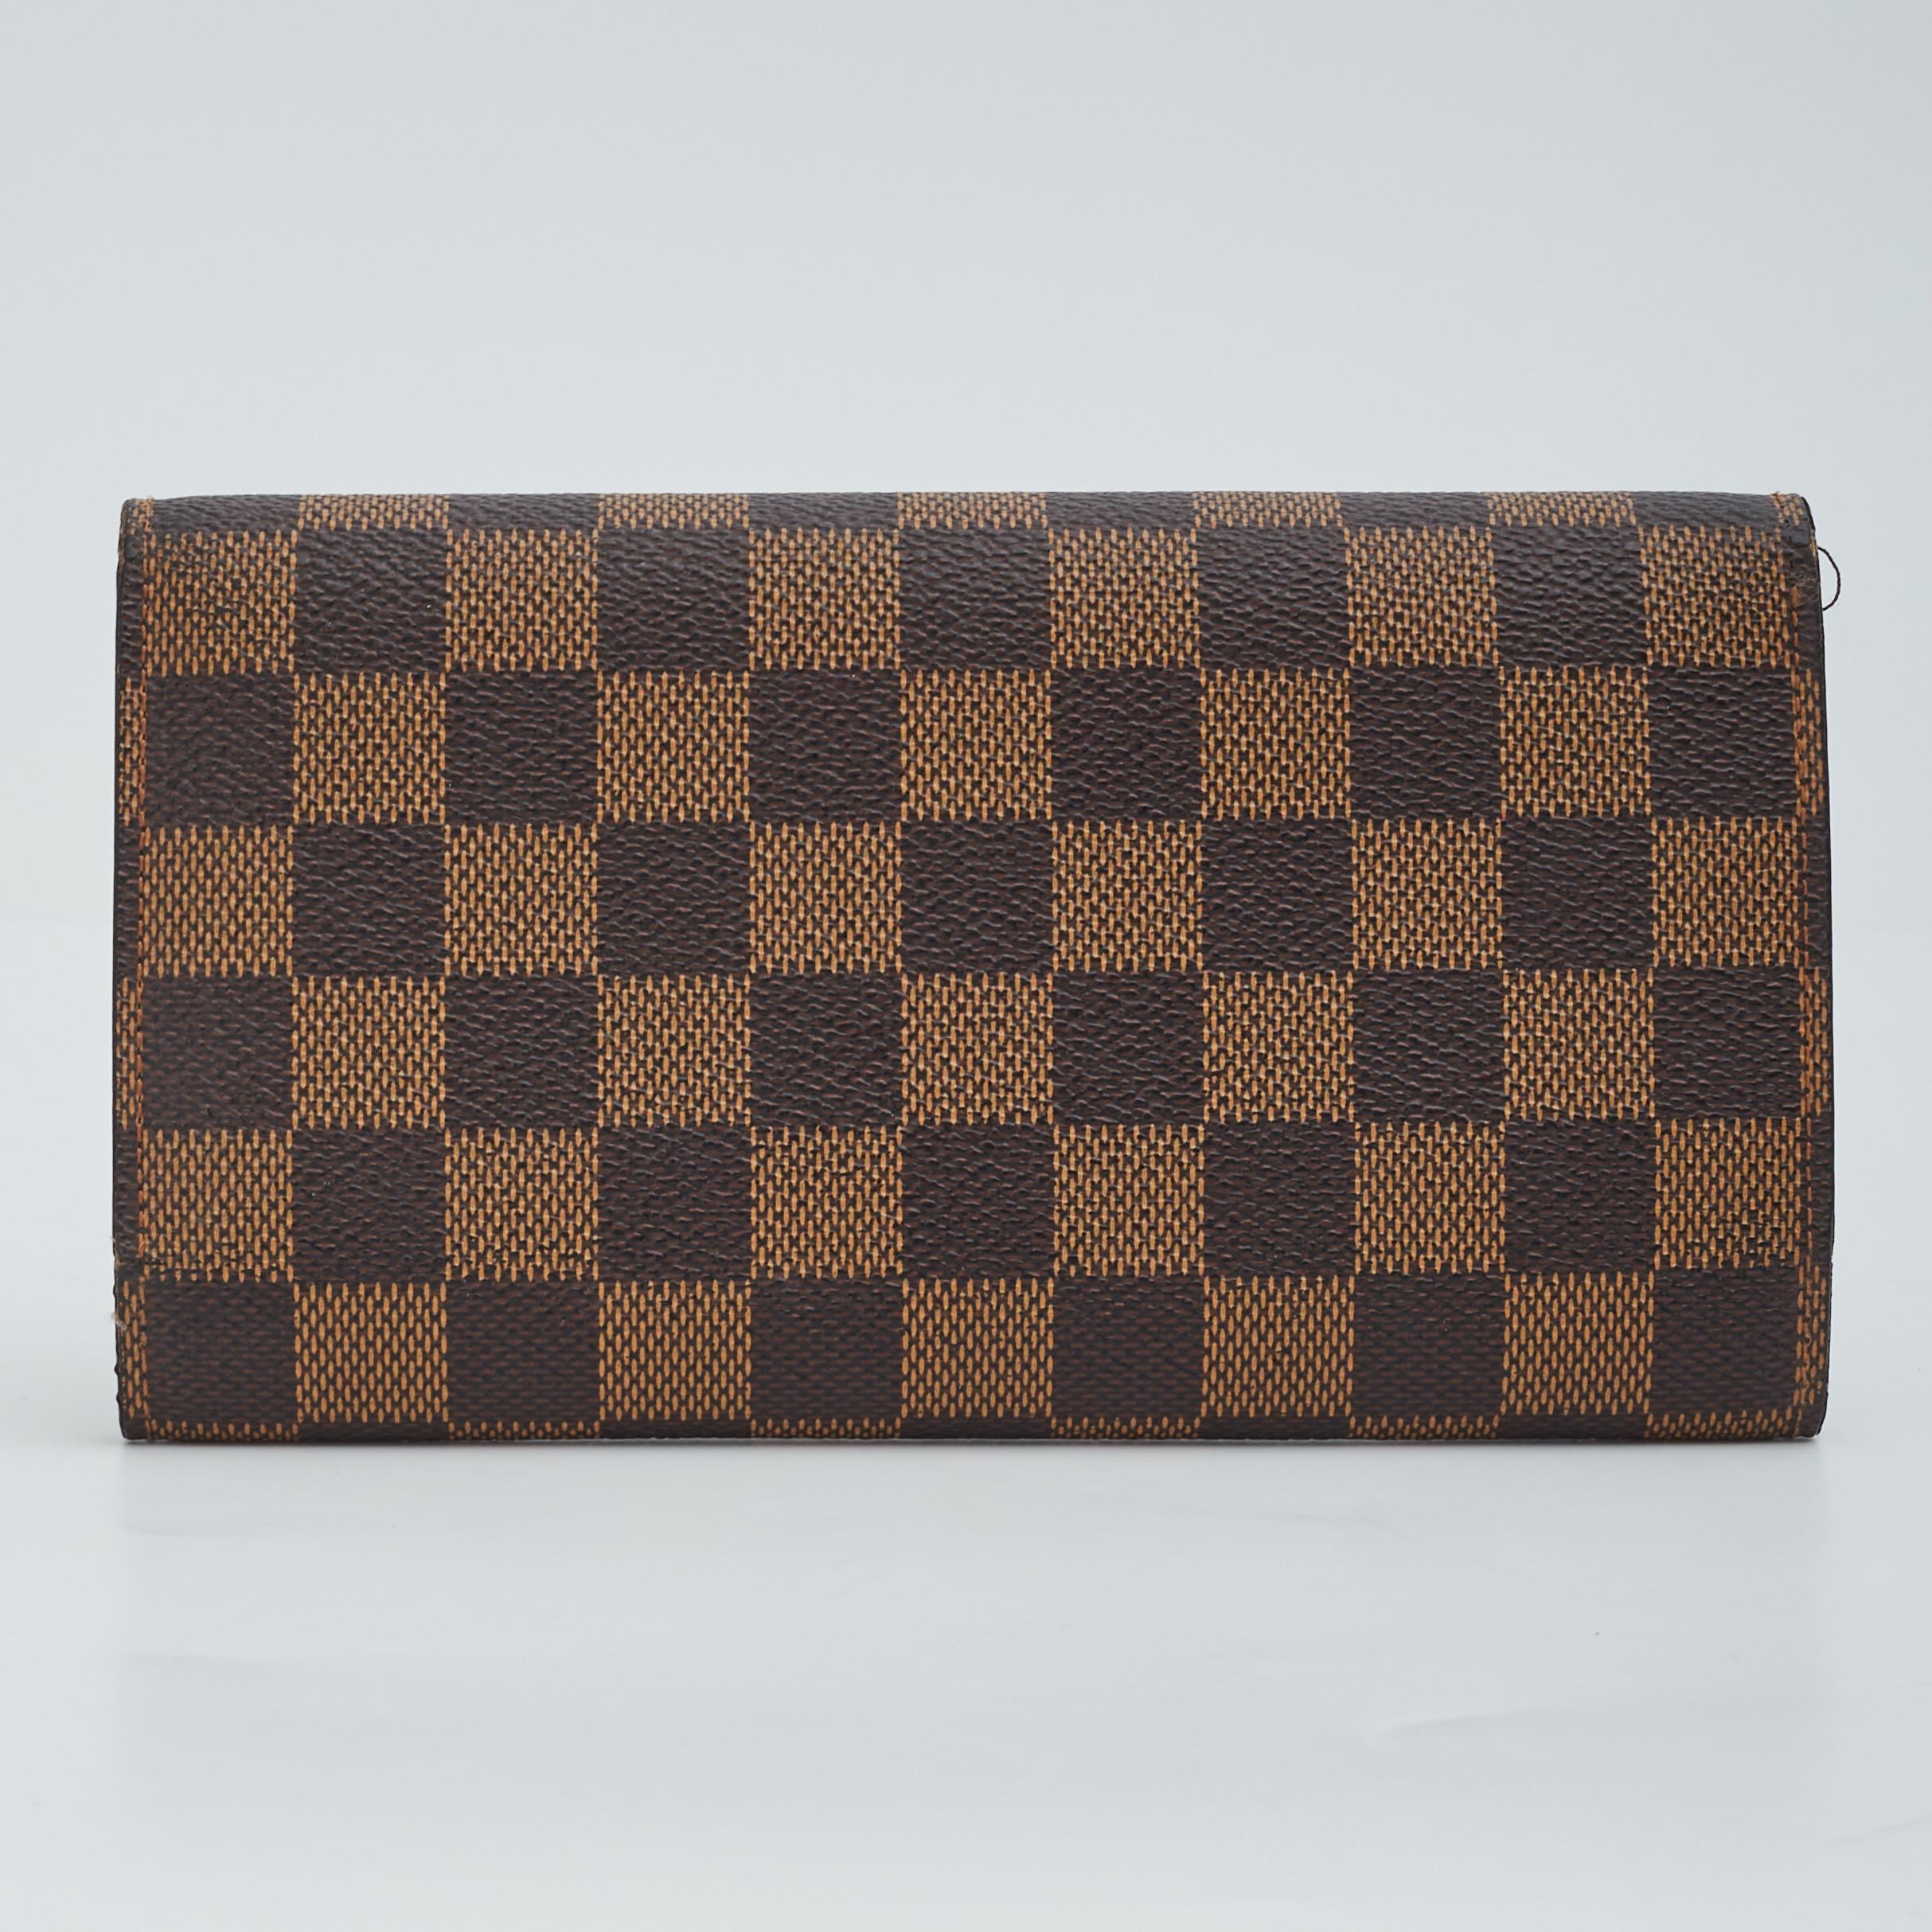 Color: Brown / damier ebène
Material: Coated canvas
Date Code: TH0094
Measures: H 4” x L 7” x D .8”
Condition: Very good. Pristine. Bad look rarely used and well stored. Light marks to interior.

Made in France